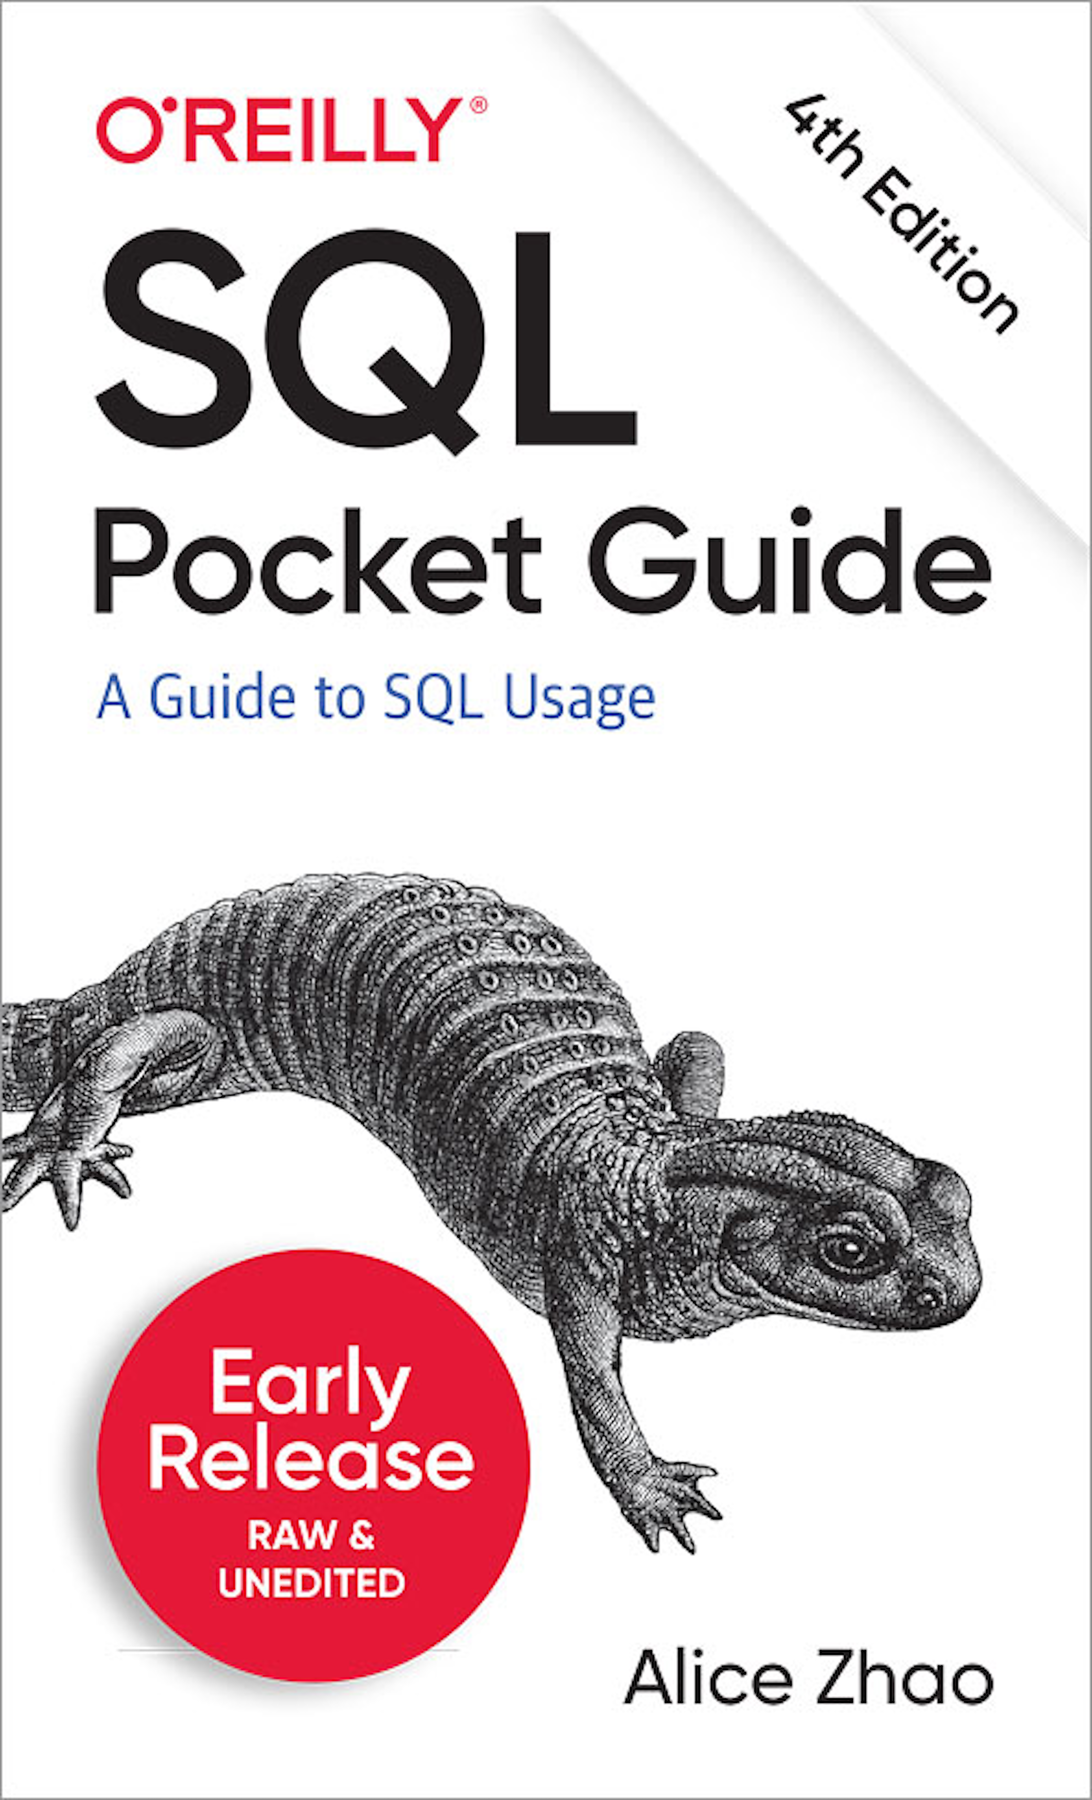 SQL Pocket Guide by Alice Zhao Copyright 2021 OReilly Media All rights - photo 1